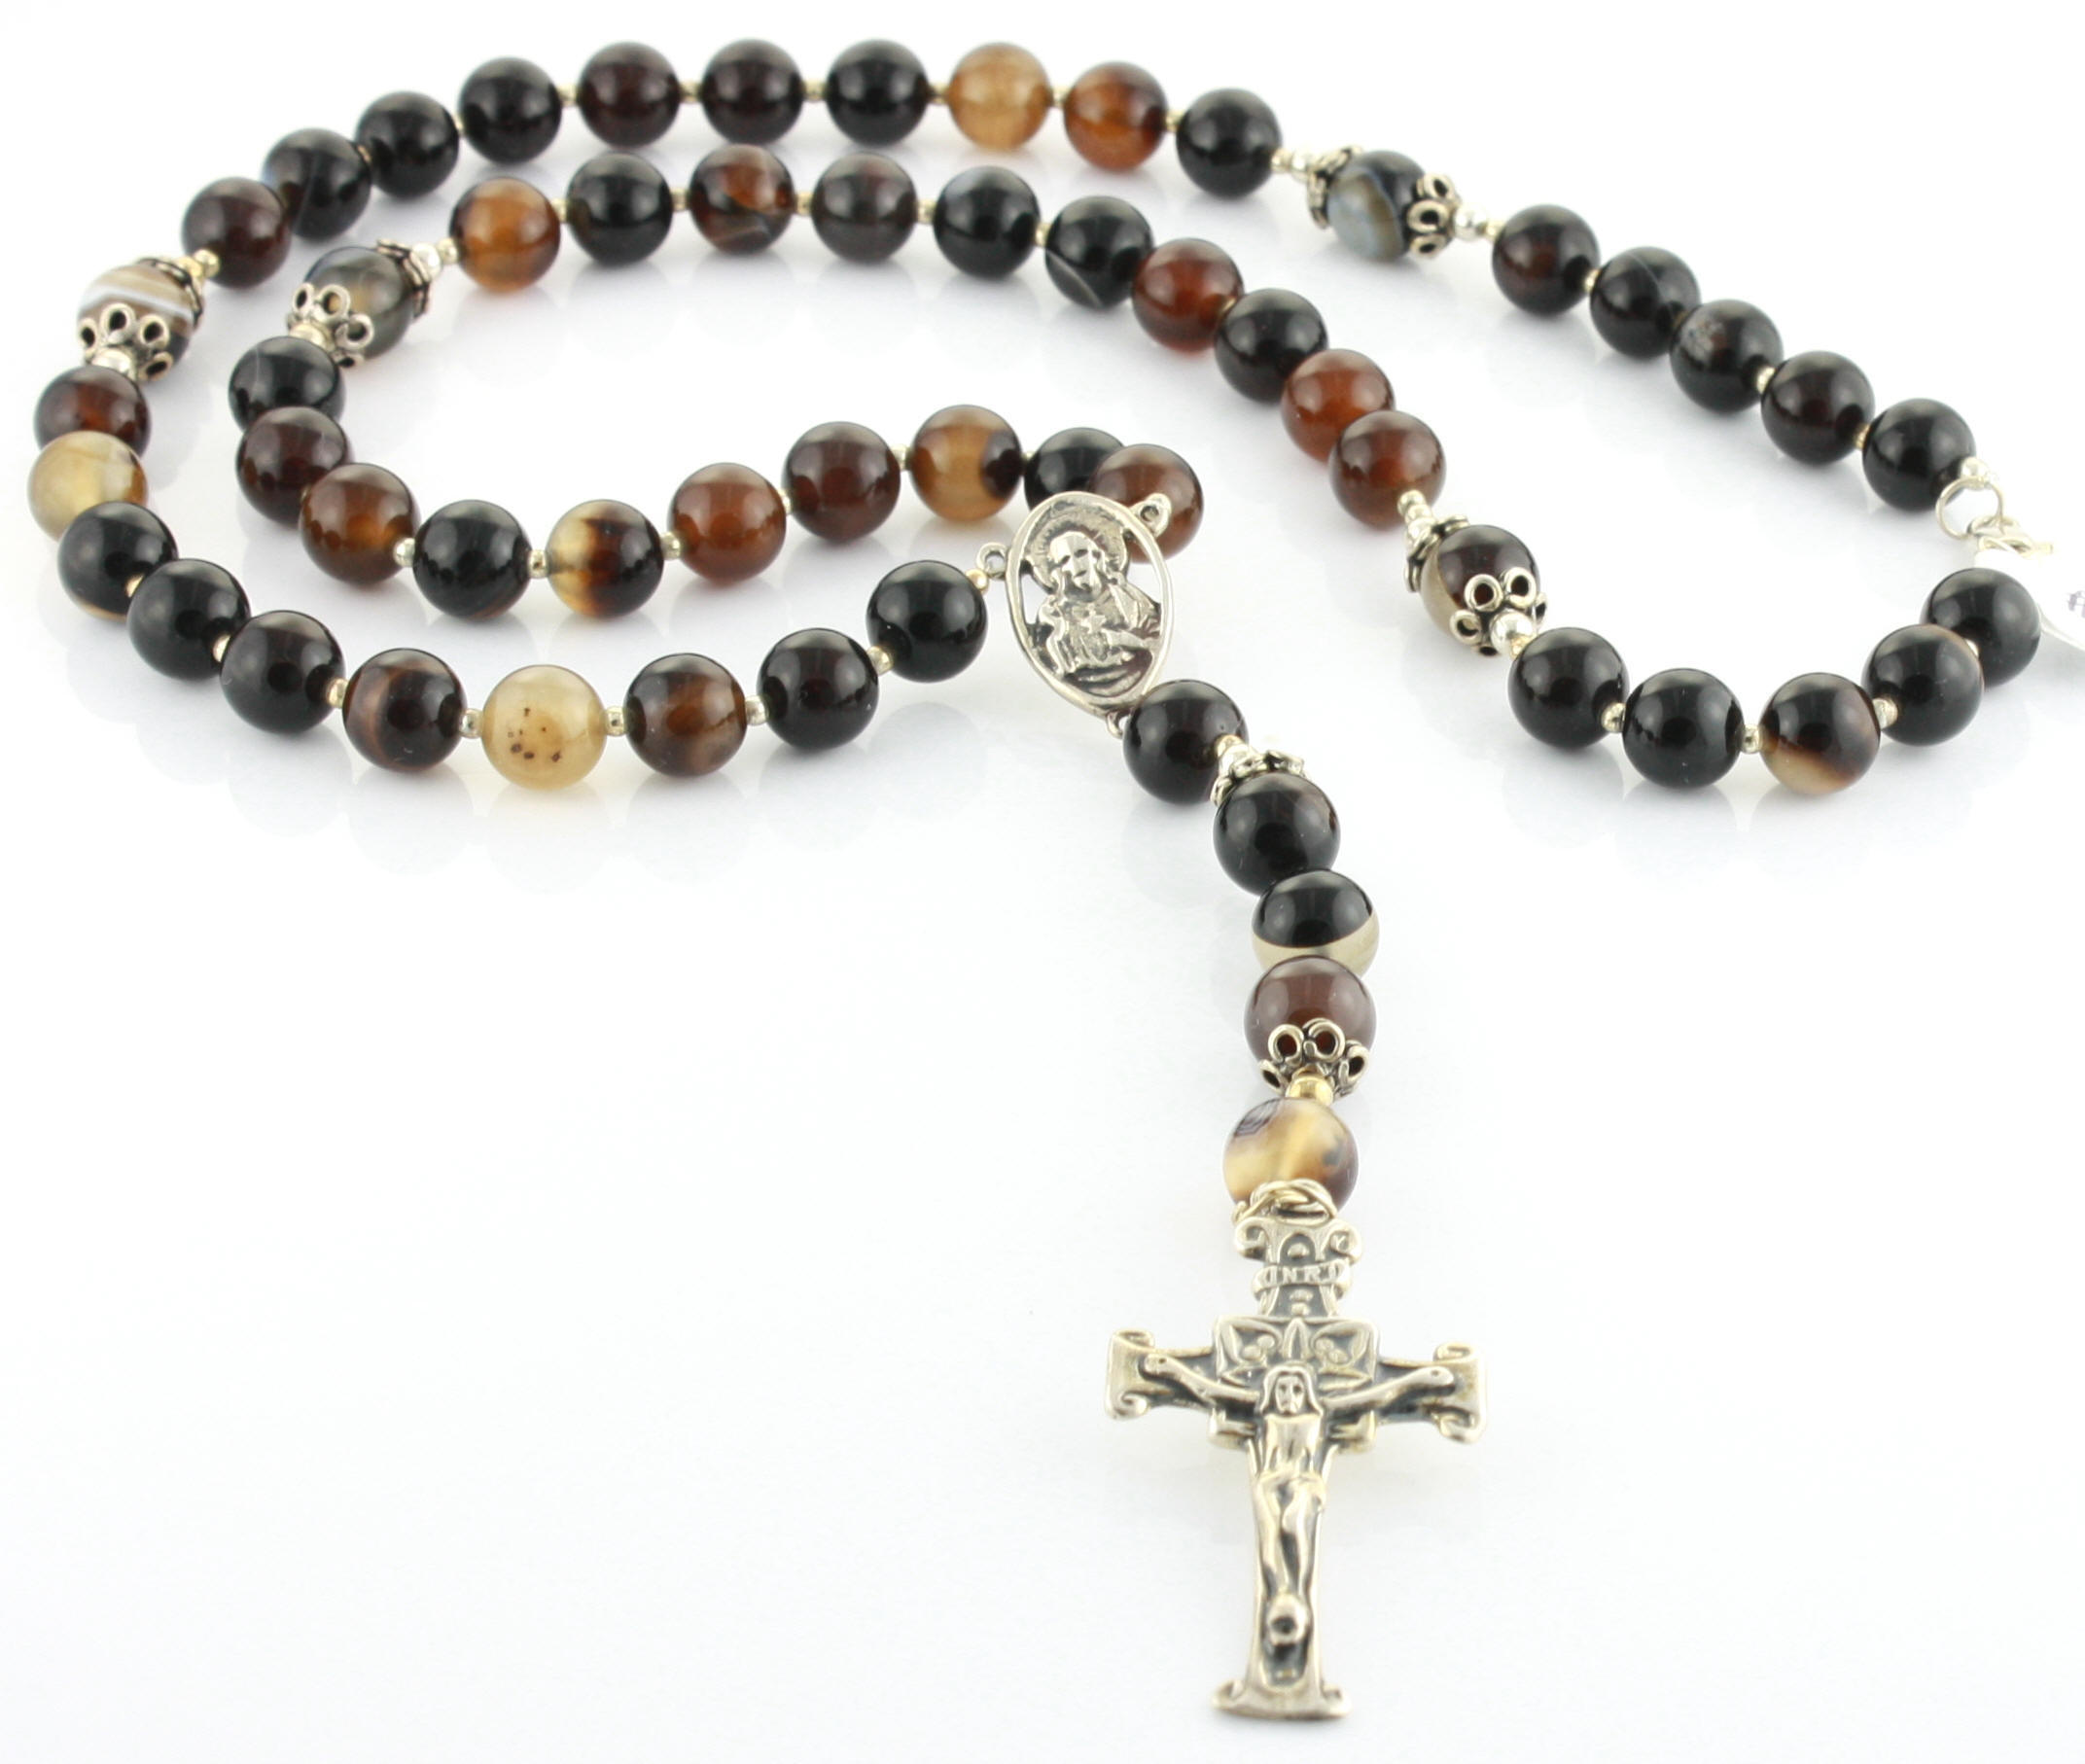 Project Marian Rosary